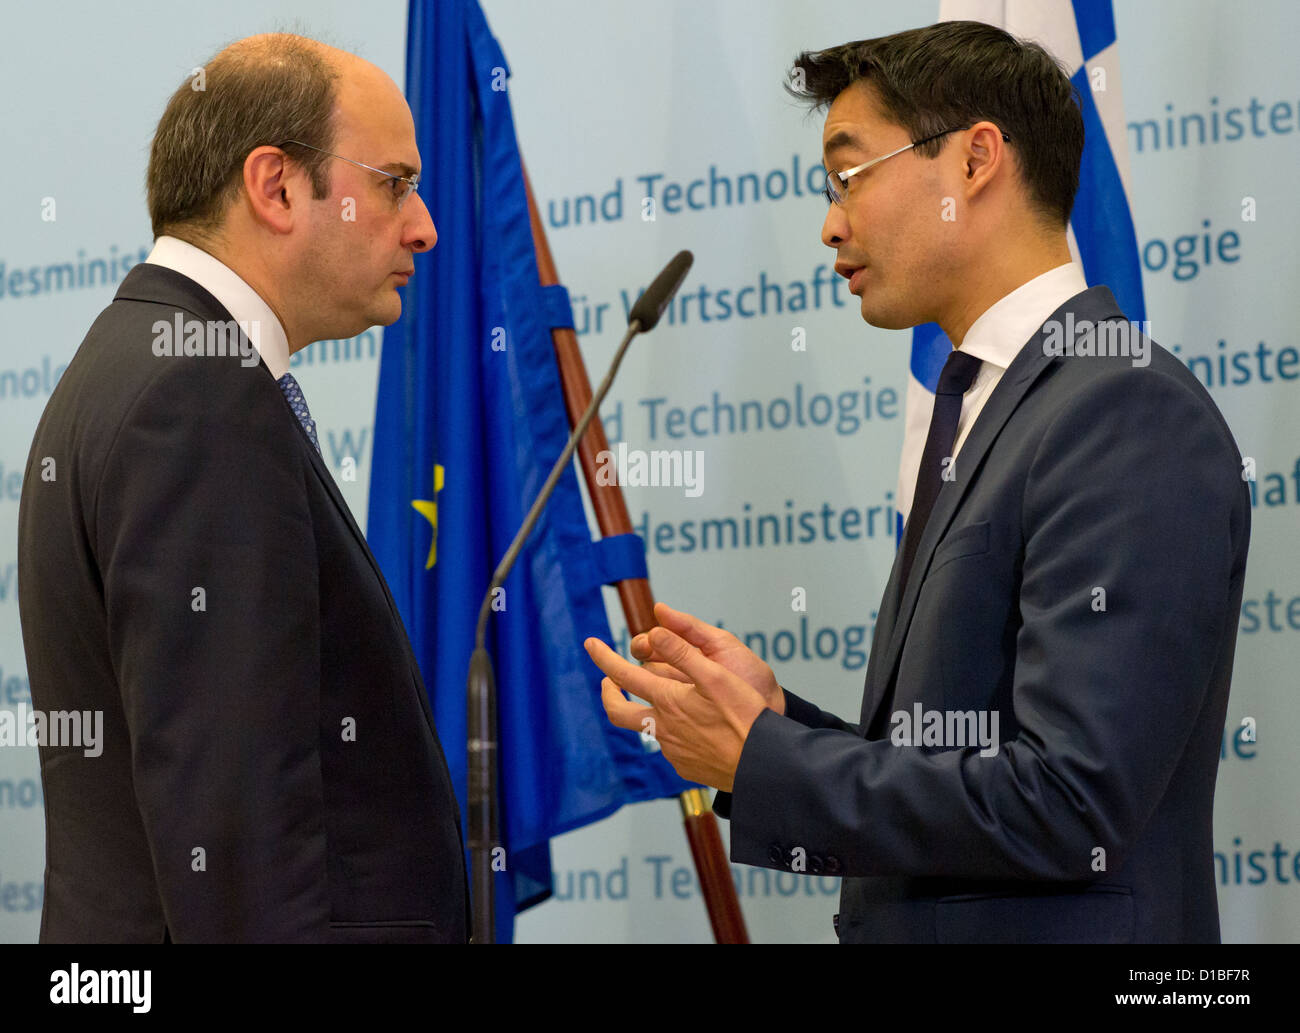 German Economy Minister Philipp Roesler and his Greek counterpart Konstantinos Chatzidakis (L) give a press conference in Berlin, Germany, 13 December 2012. Photo: TIM BRAKEMEIER Stock Photo